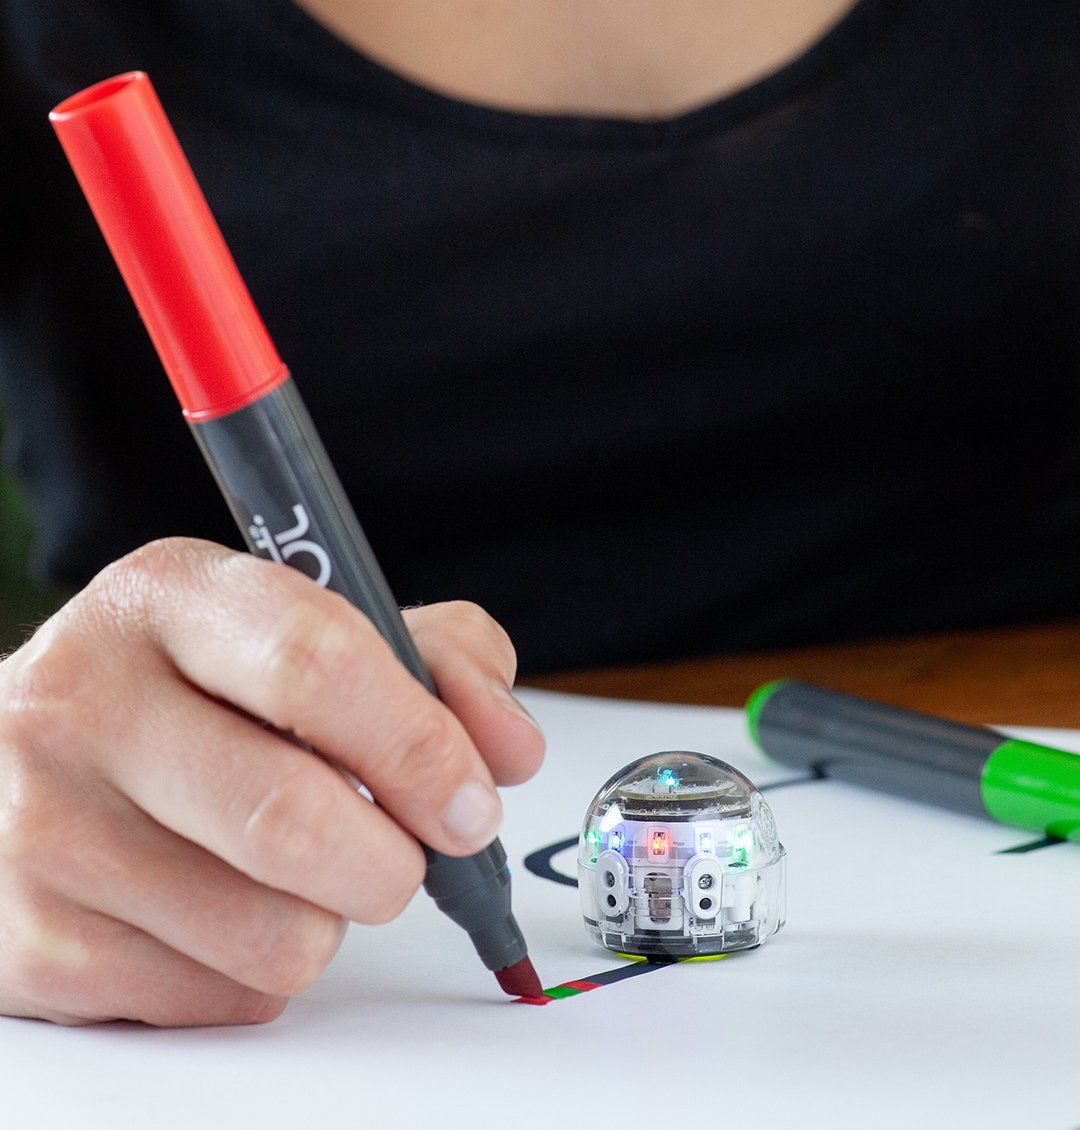 Hands On With the Ozobot Evo